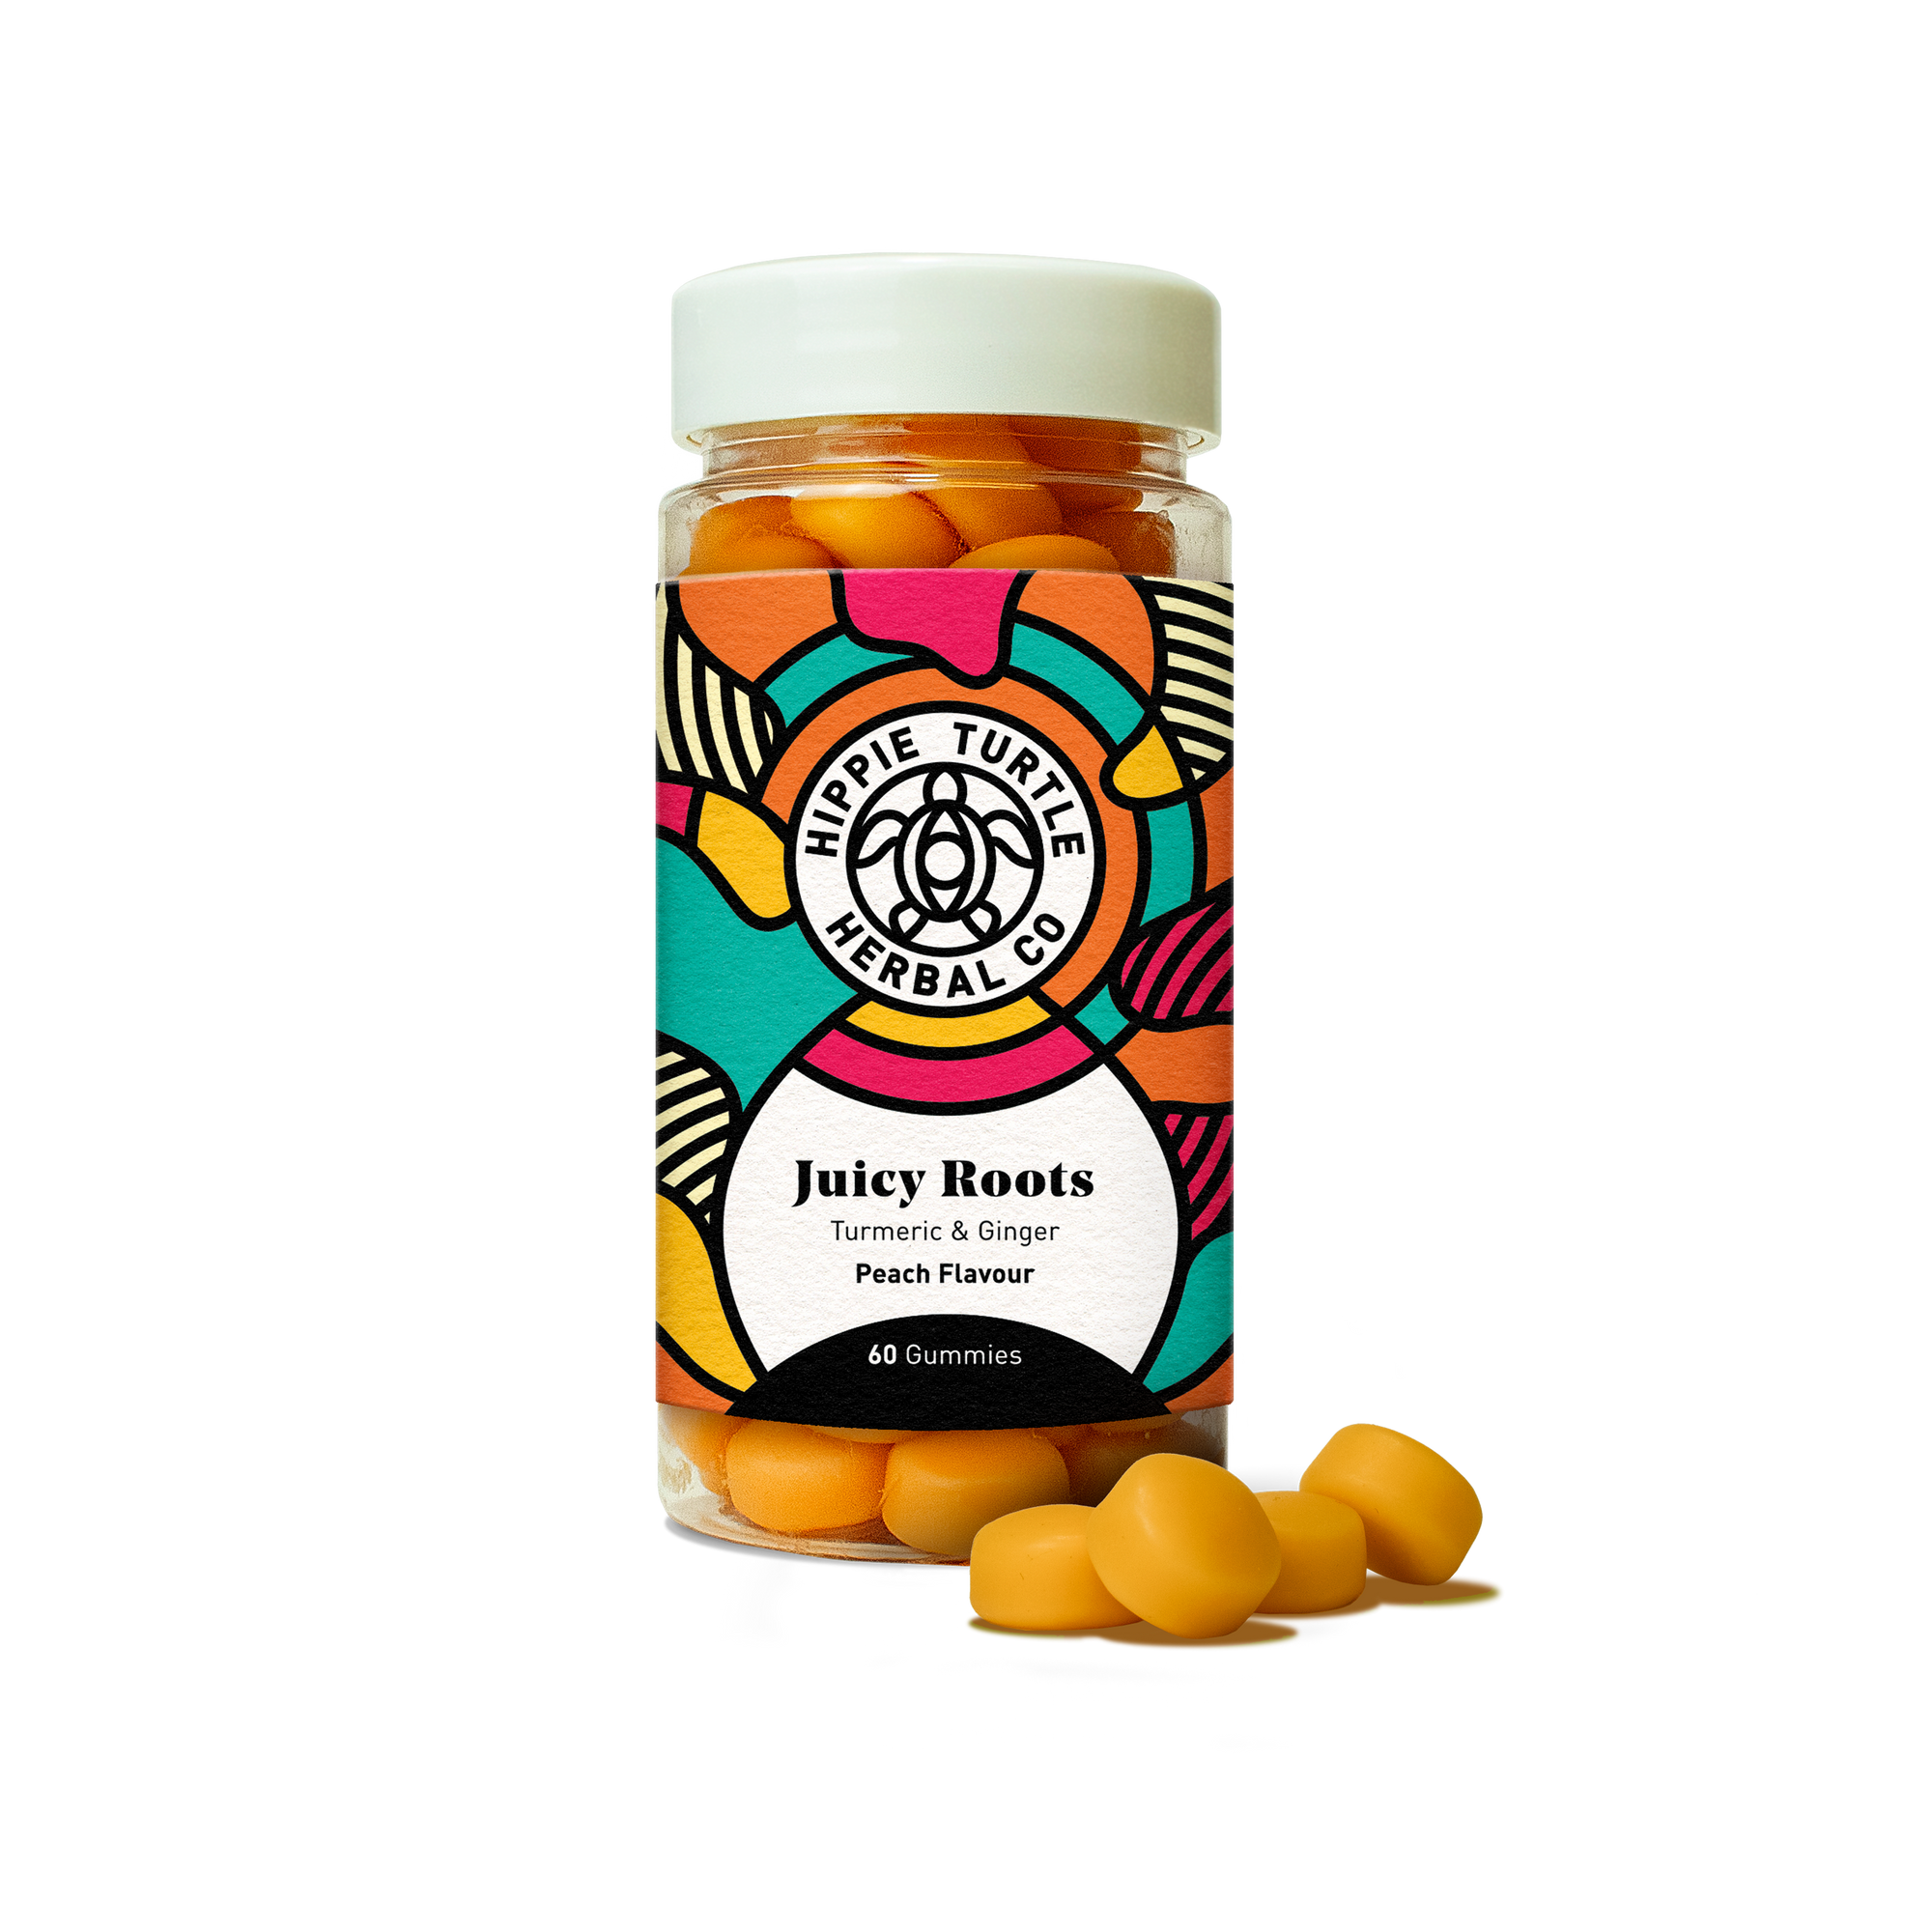 Chewable turmeric and ginger gummies to help improve digestive health and gut health